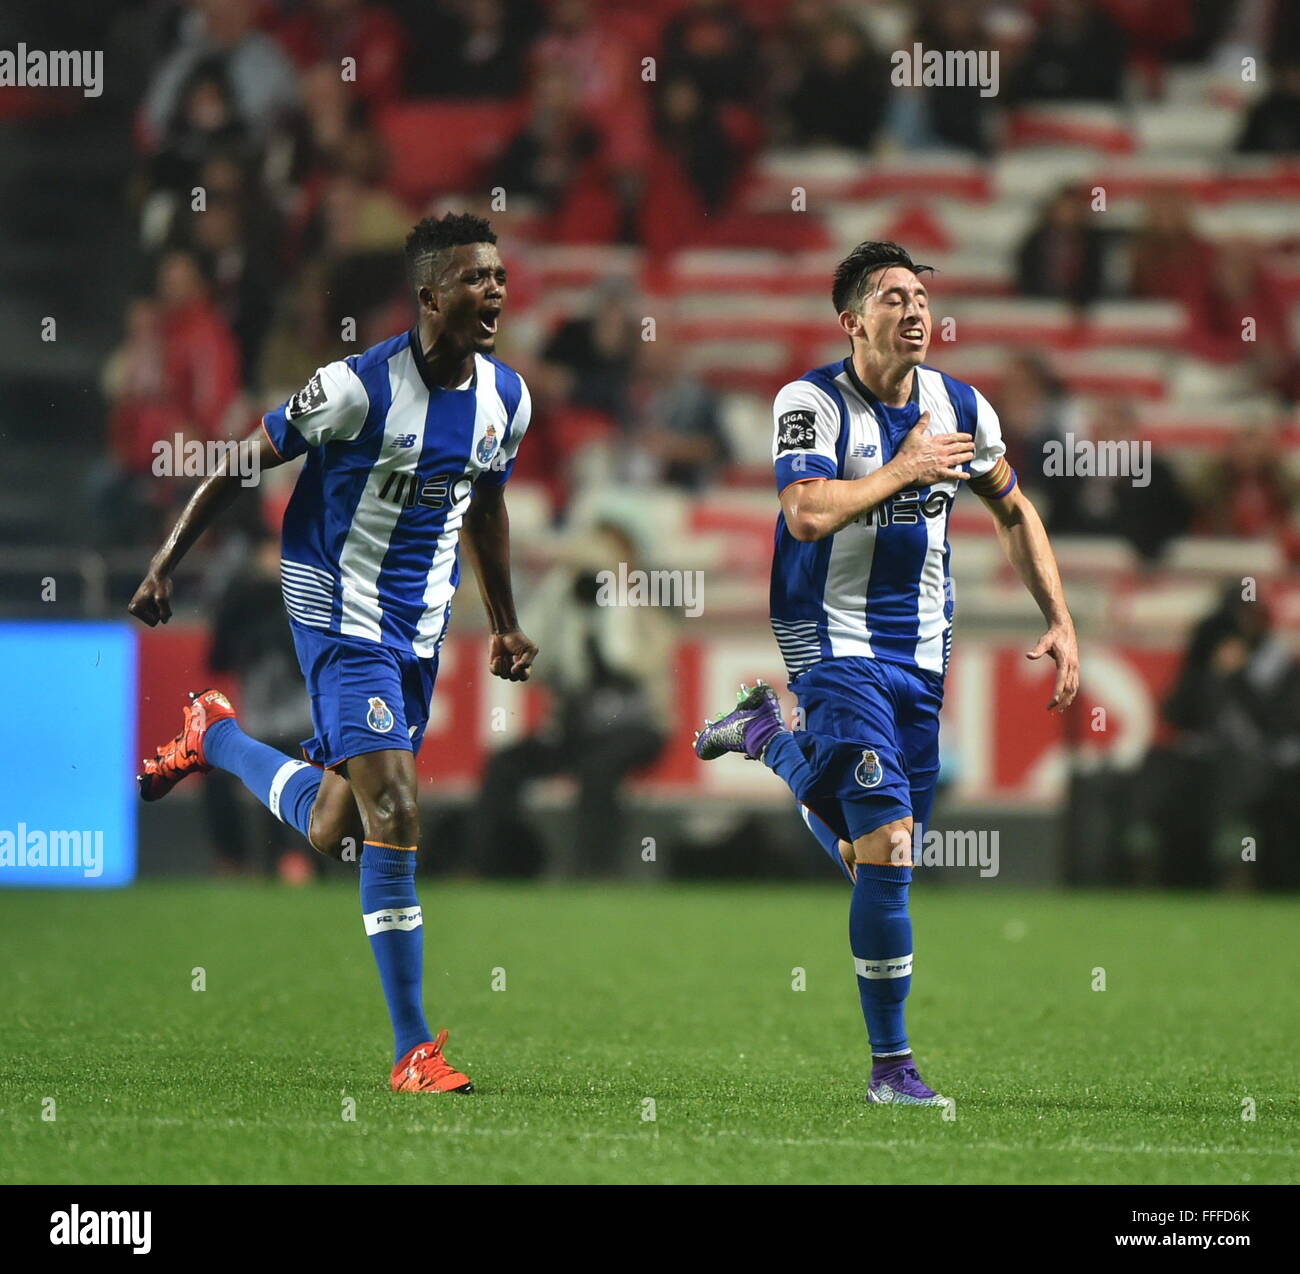 Lisbon, Portugal. 12th Feb, 2016. Porto's Hector Herrera (R) celebrates after scoring during the Portuguese league soccer match between SL Benfica and FC Porto at the Luz stadium in Lisbon, Portugal, on Feb. 12, 2016. Benfica lost 1-2. Credit:  Zhang Liyun/Xinhua/Alamy Live News Stock Photo